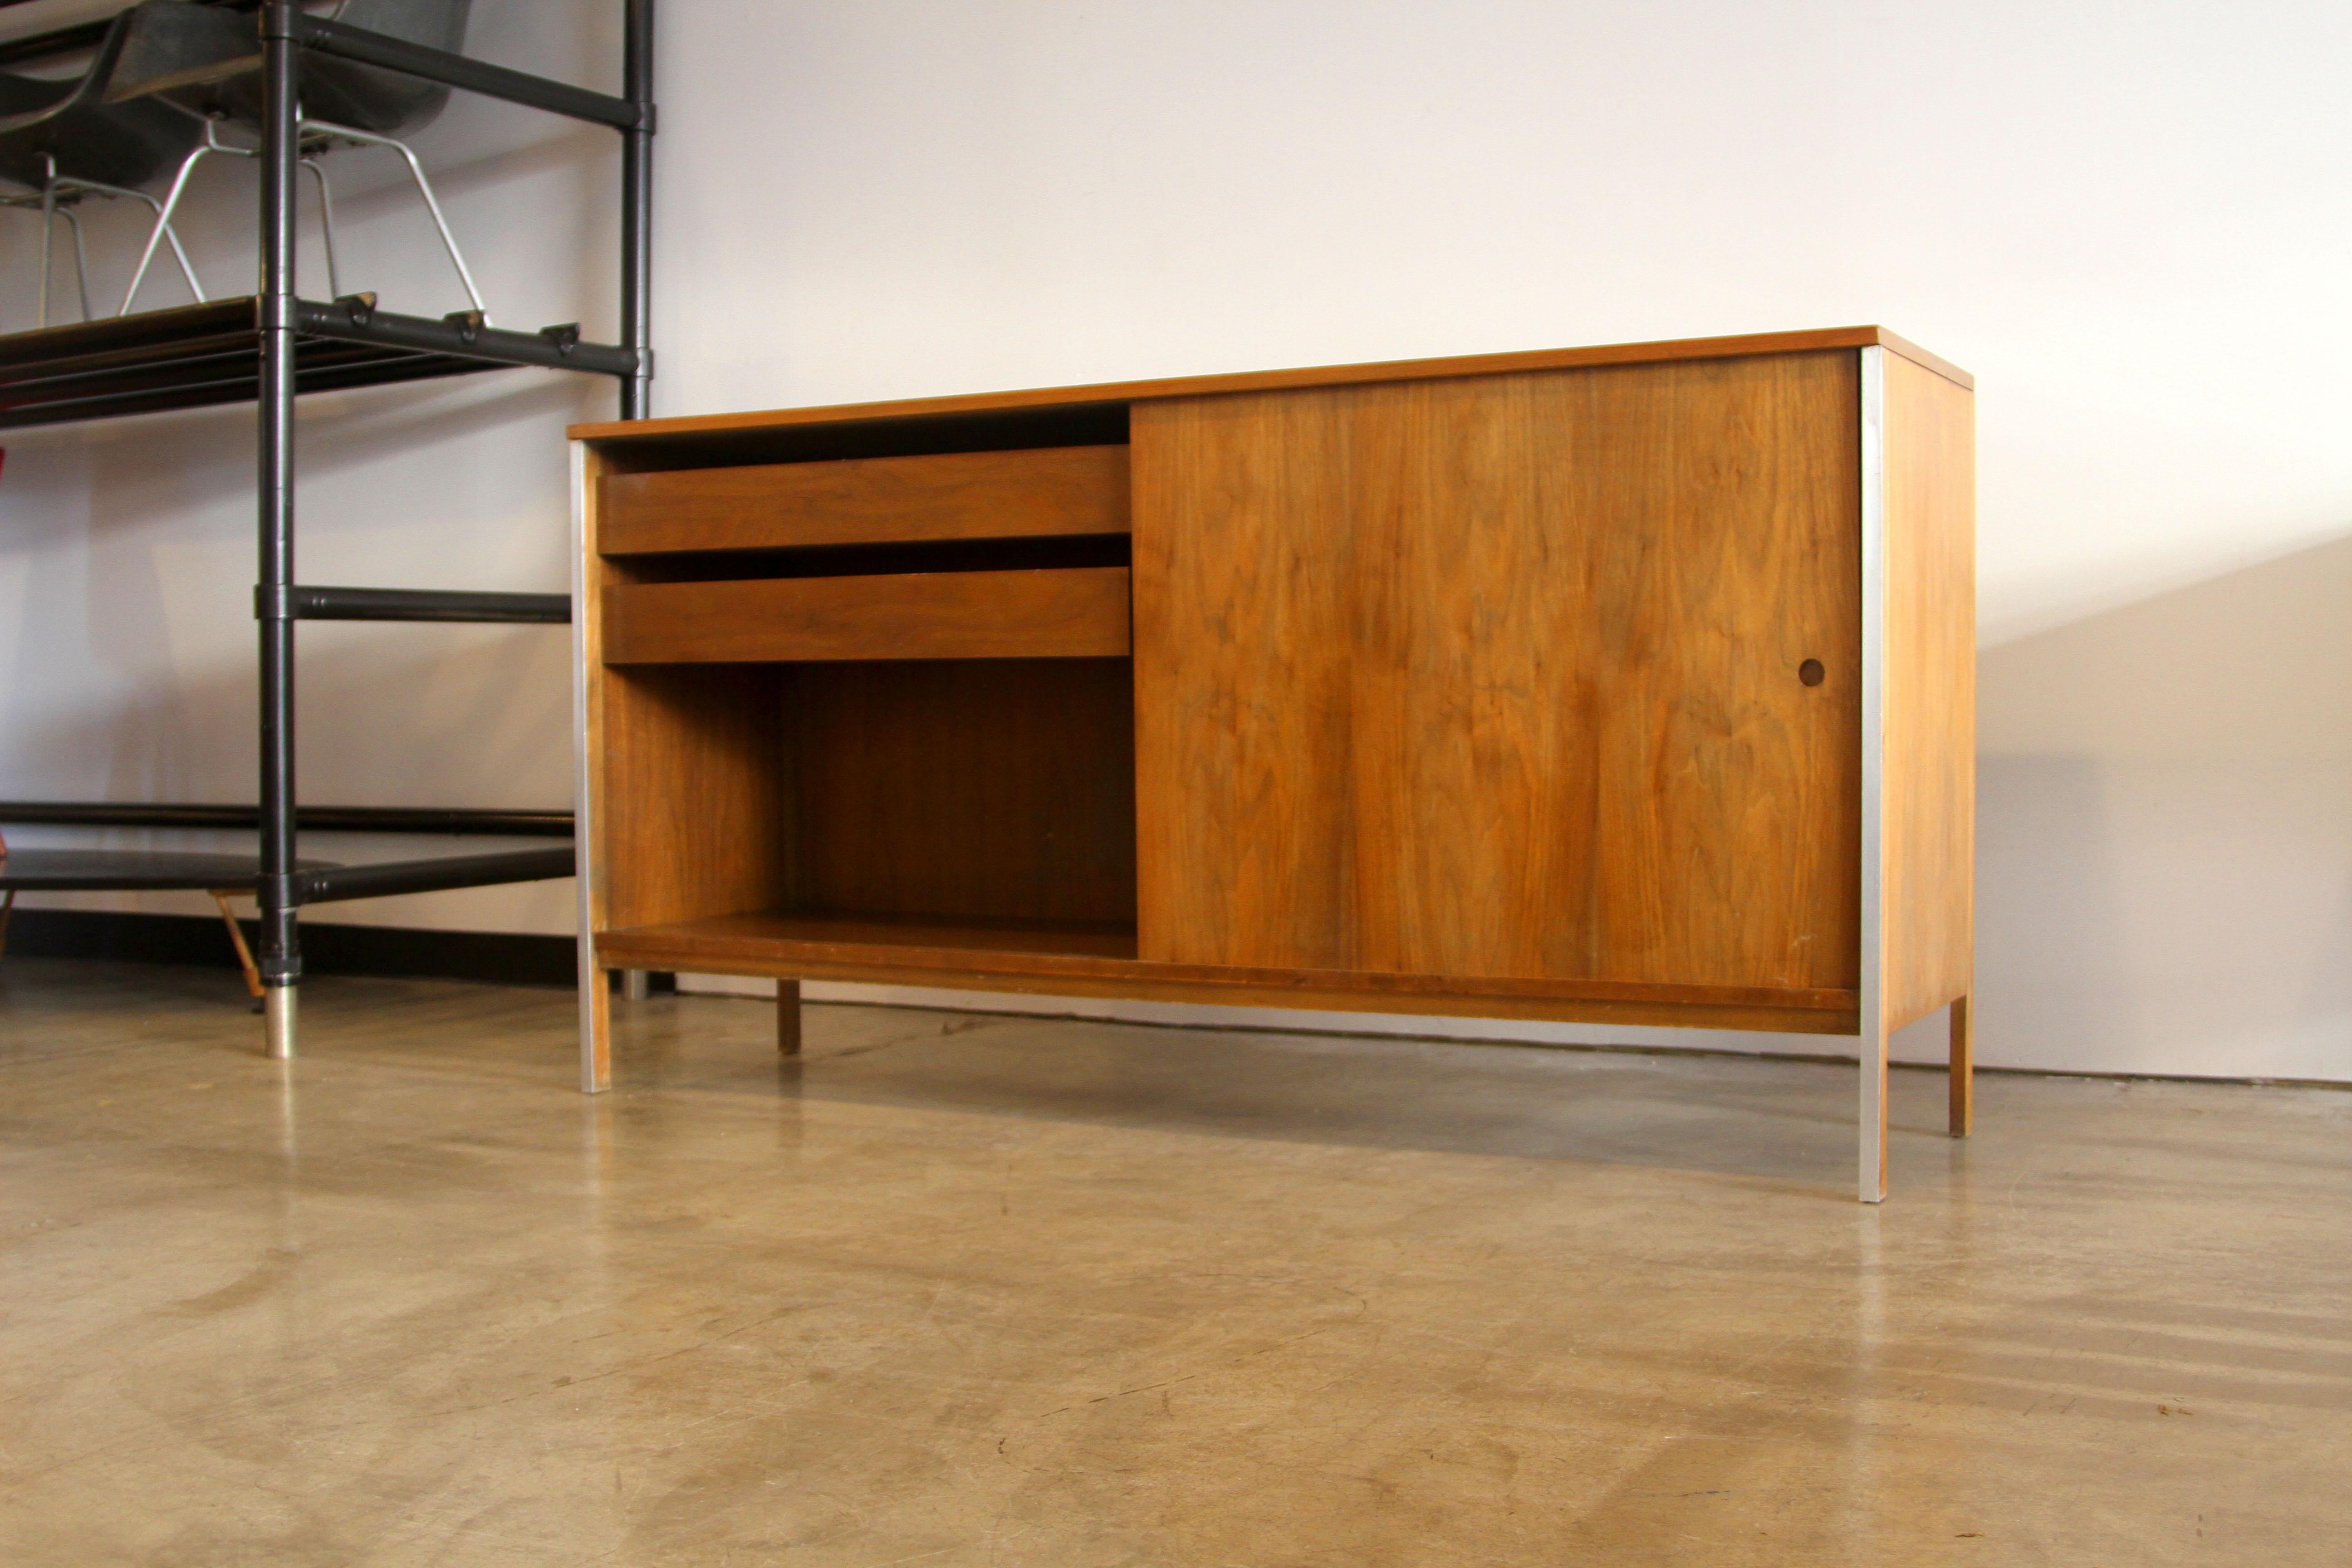 Designer: Paul McCobb
Manufacture: Calivin 
Period/style: Mid-Century Modern 
Country: US 
Date: 1950s.
 